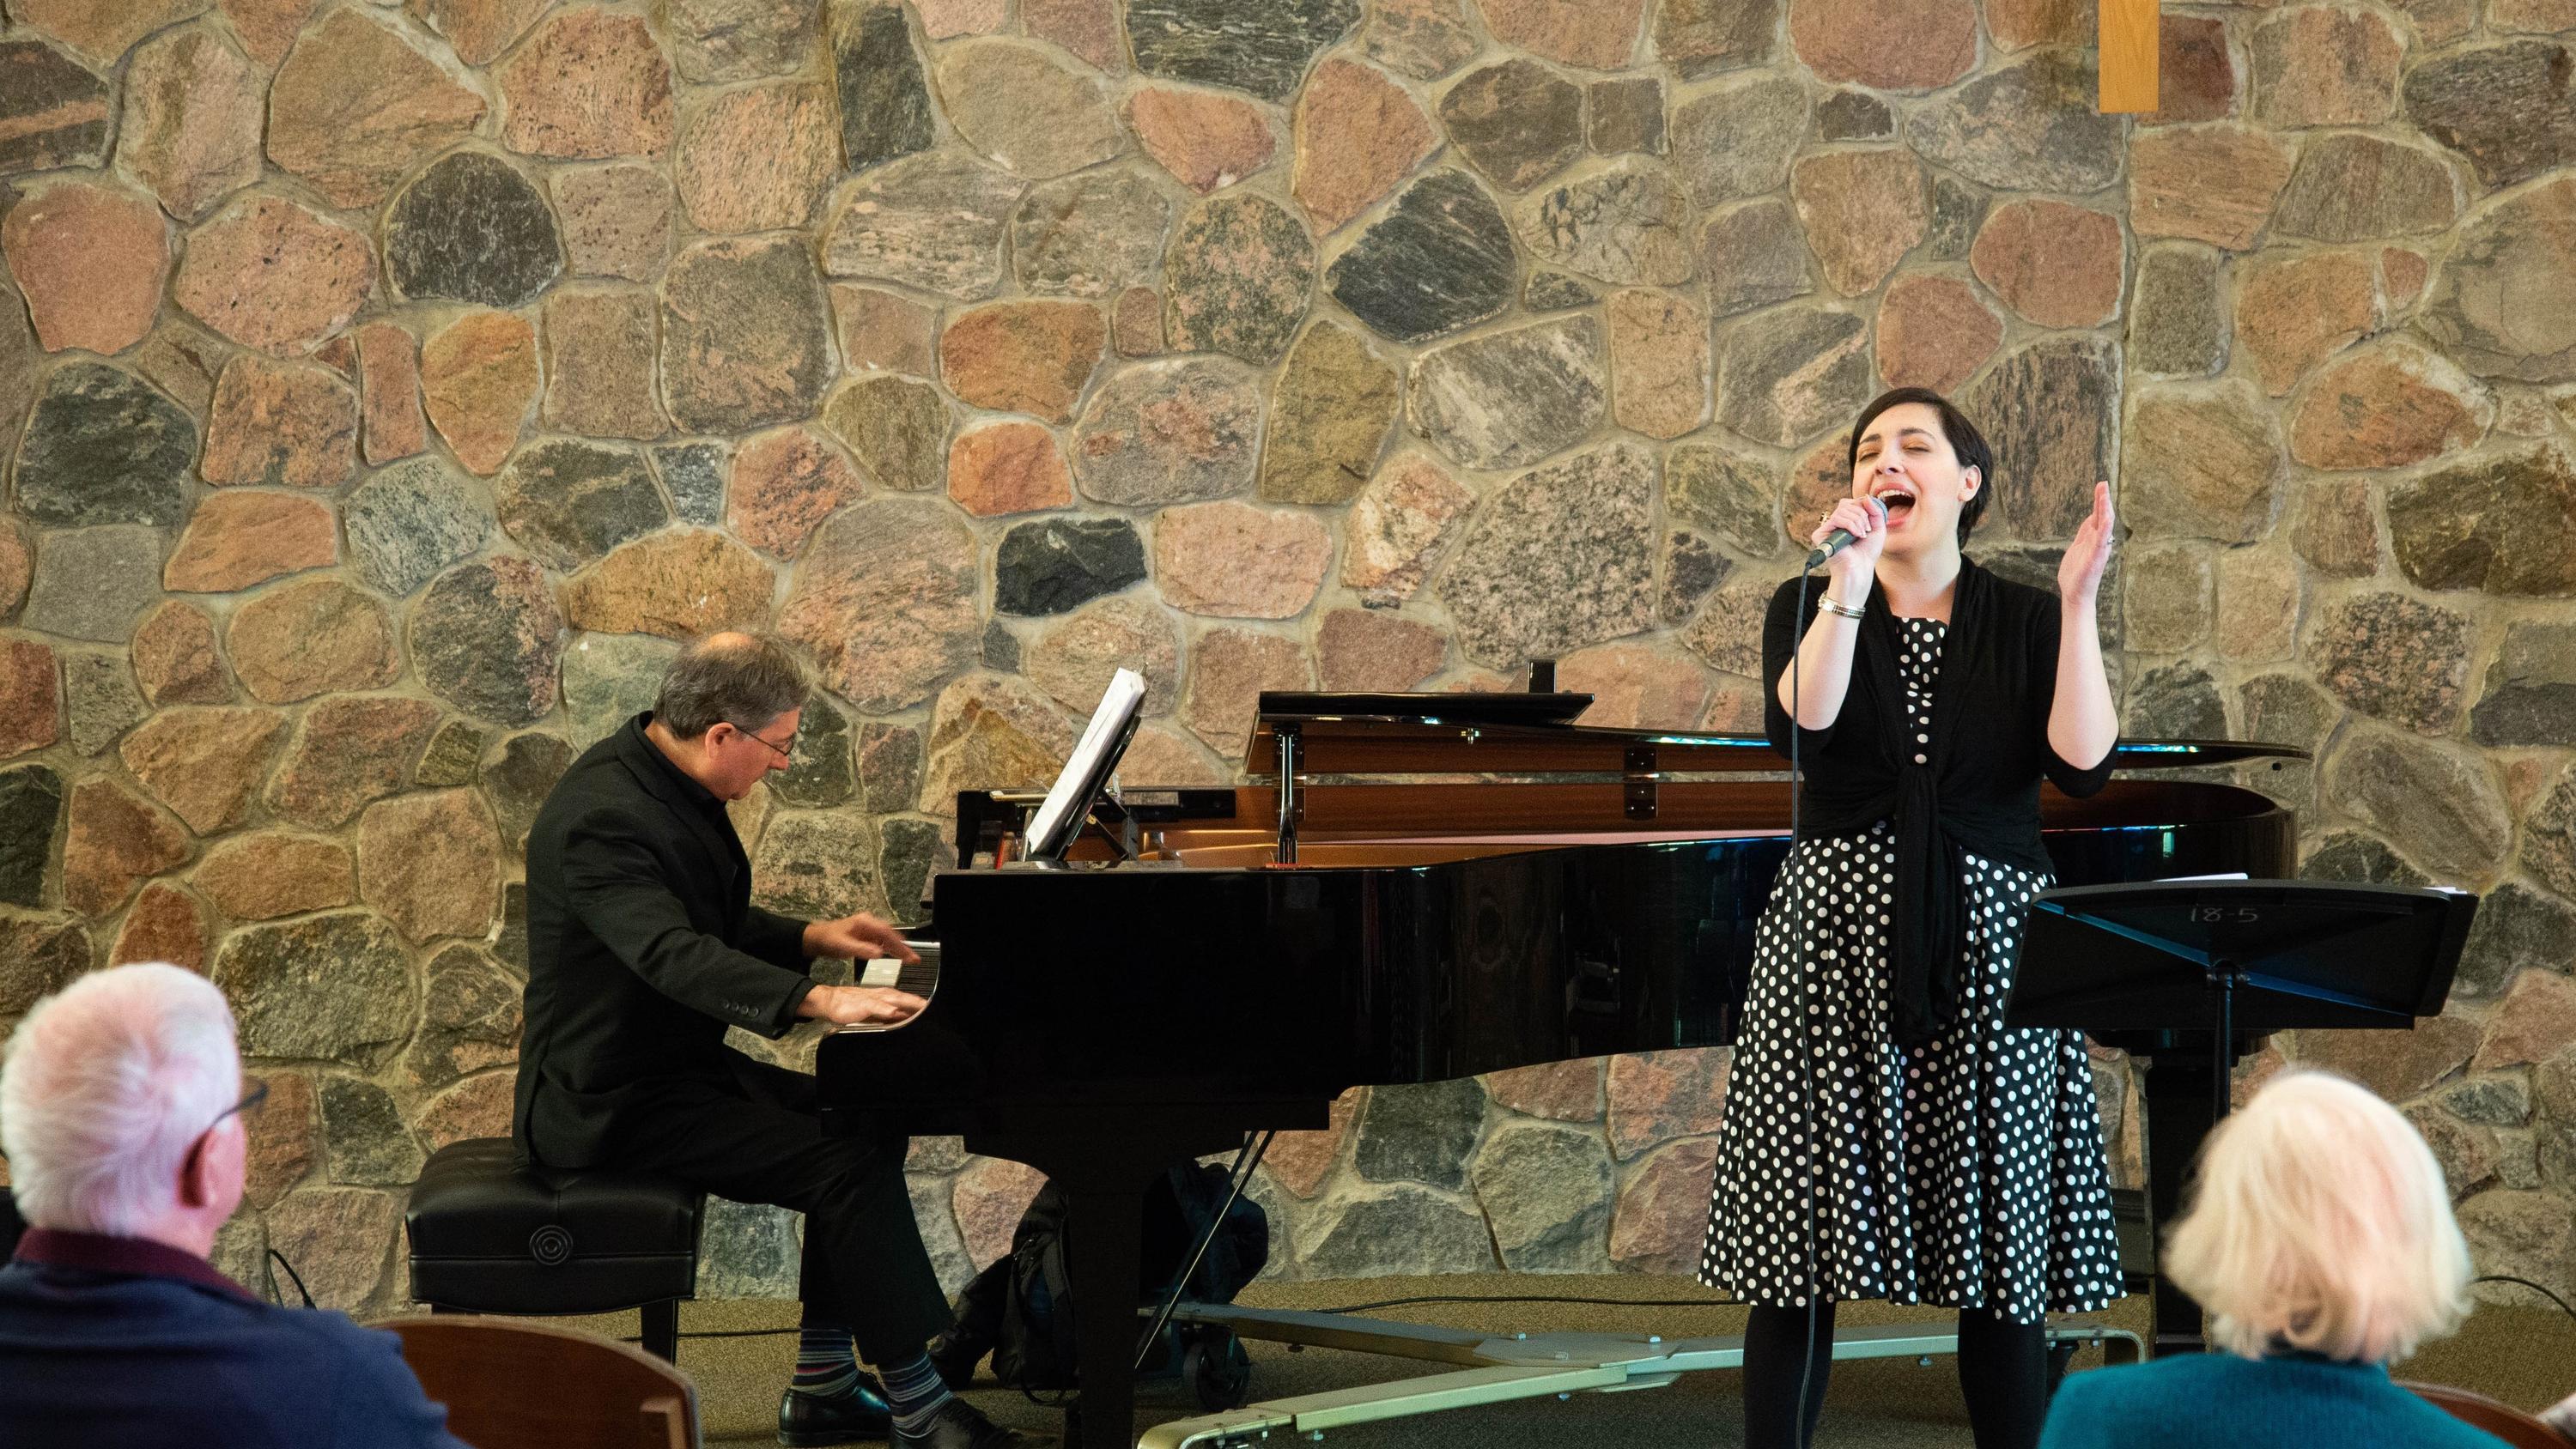 Mary-Catherine sings while paul stouffer plays piano